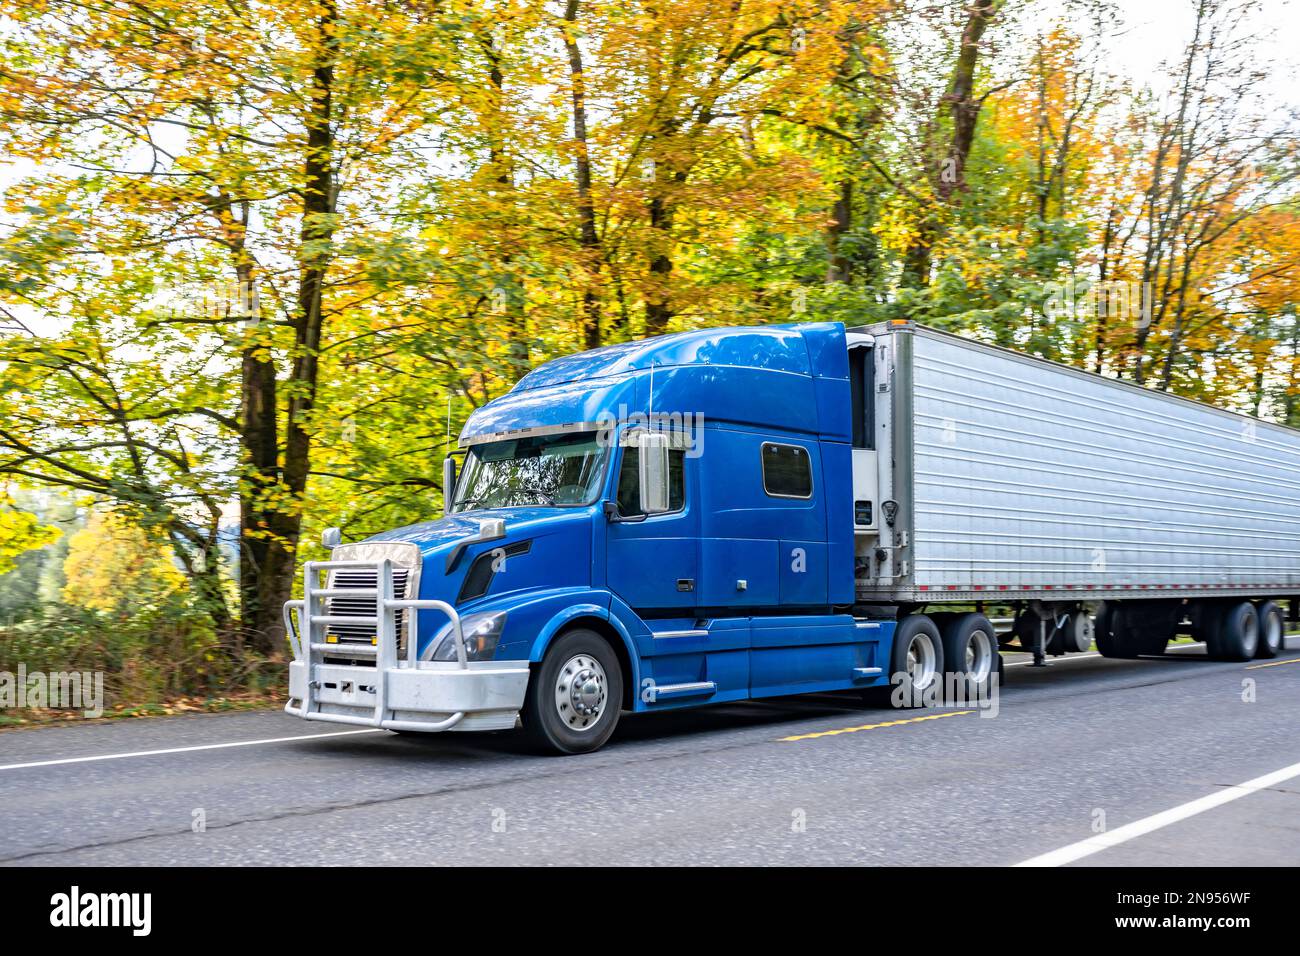 Industrial Long hauler big rig blue semi truck tractor with extended cab for truck driver rest transporting frozen cargo in refrigerator semi trailer Stock Photo